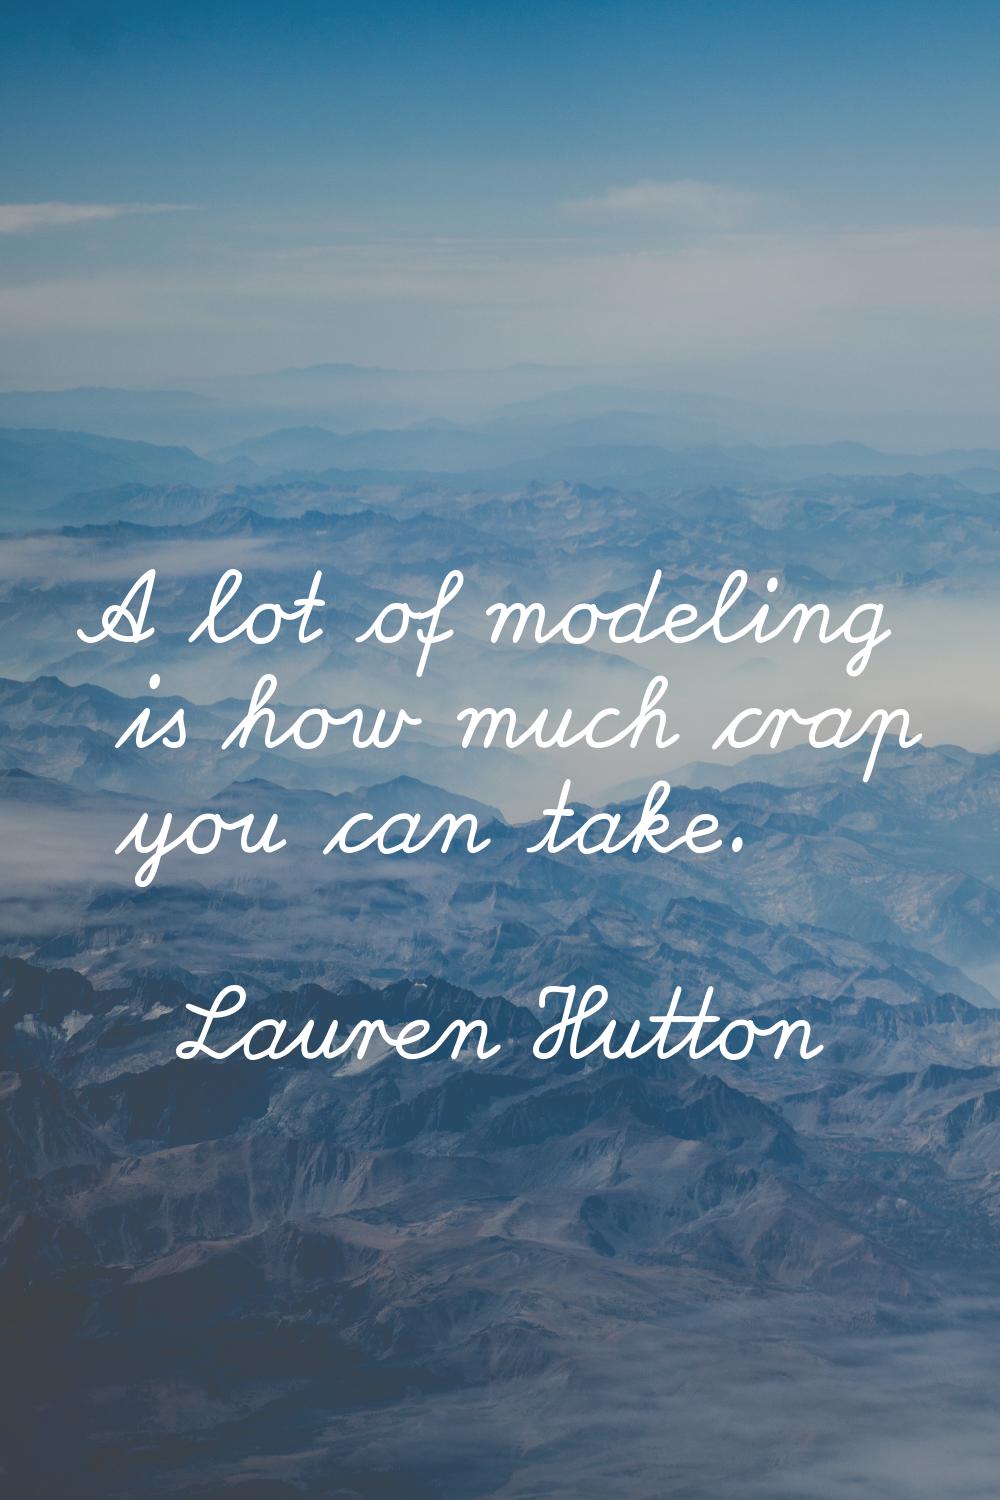 A lot of modeling is how much crap you can take.